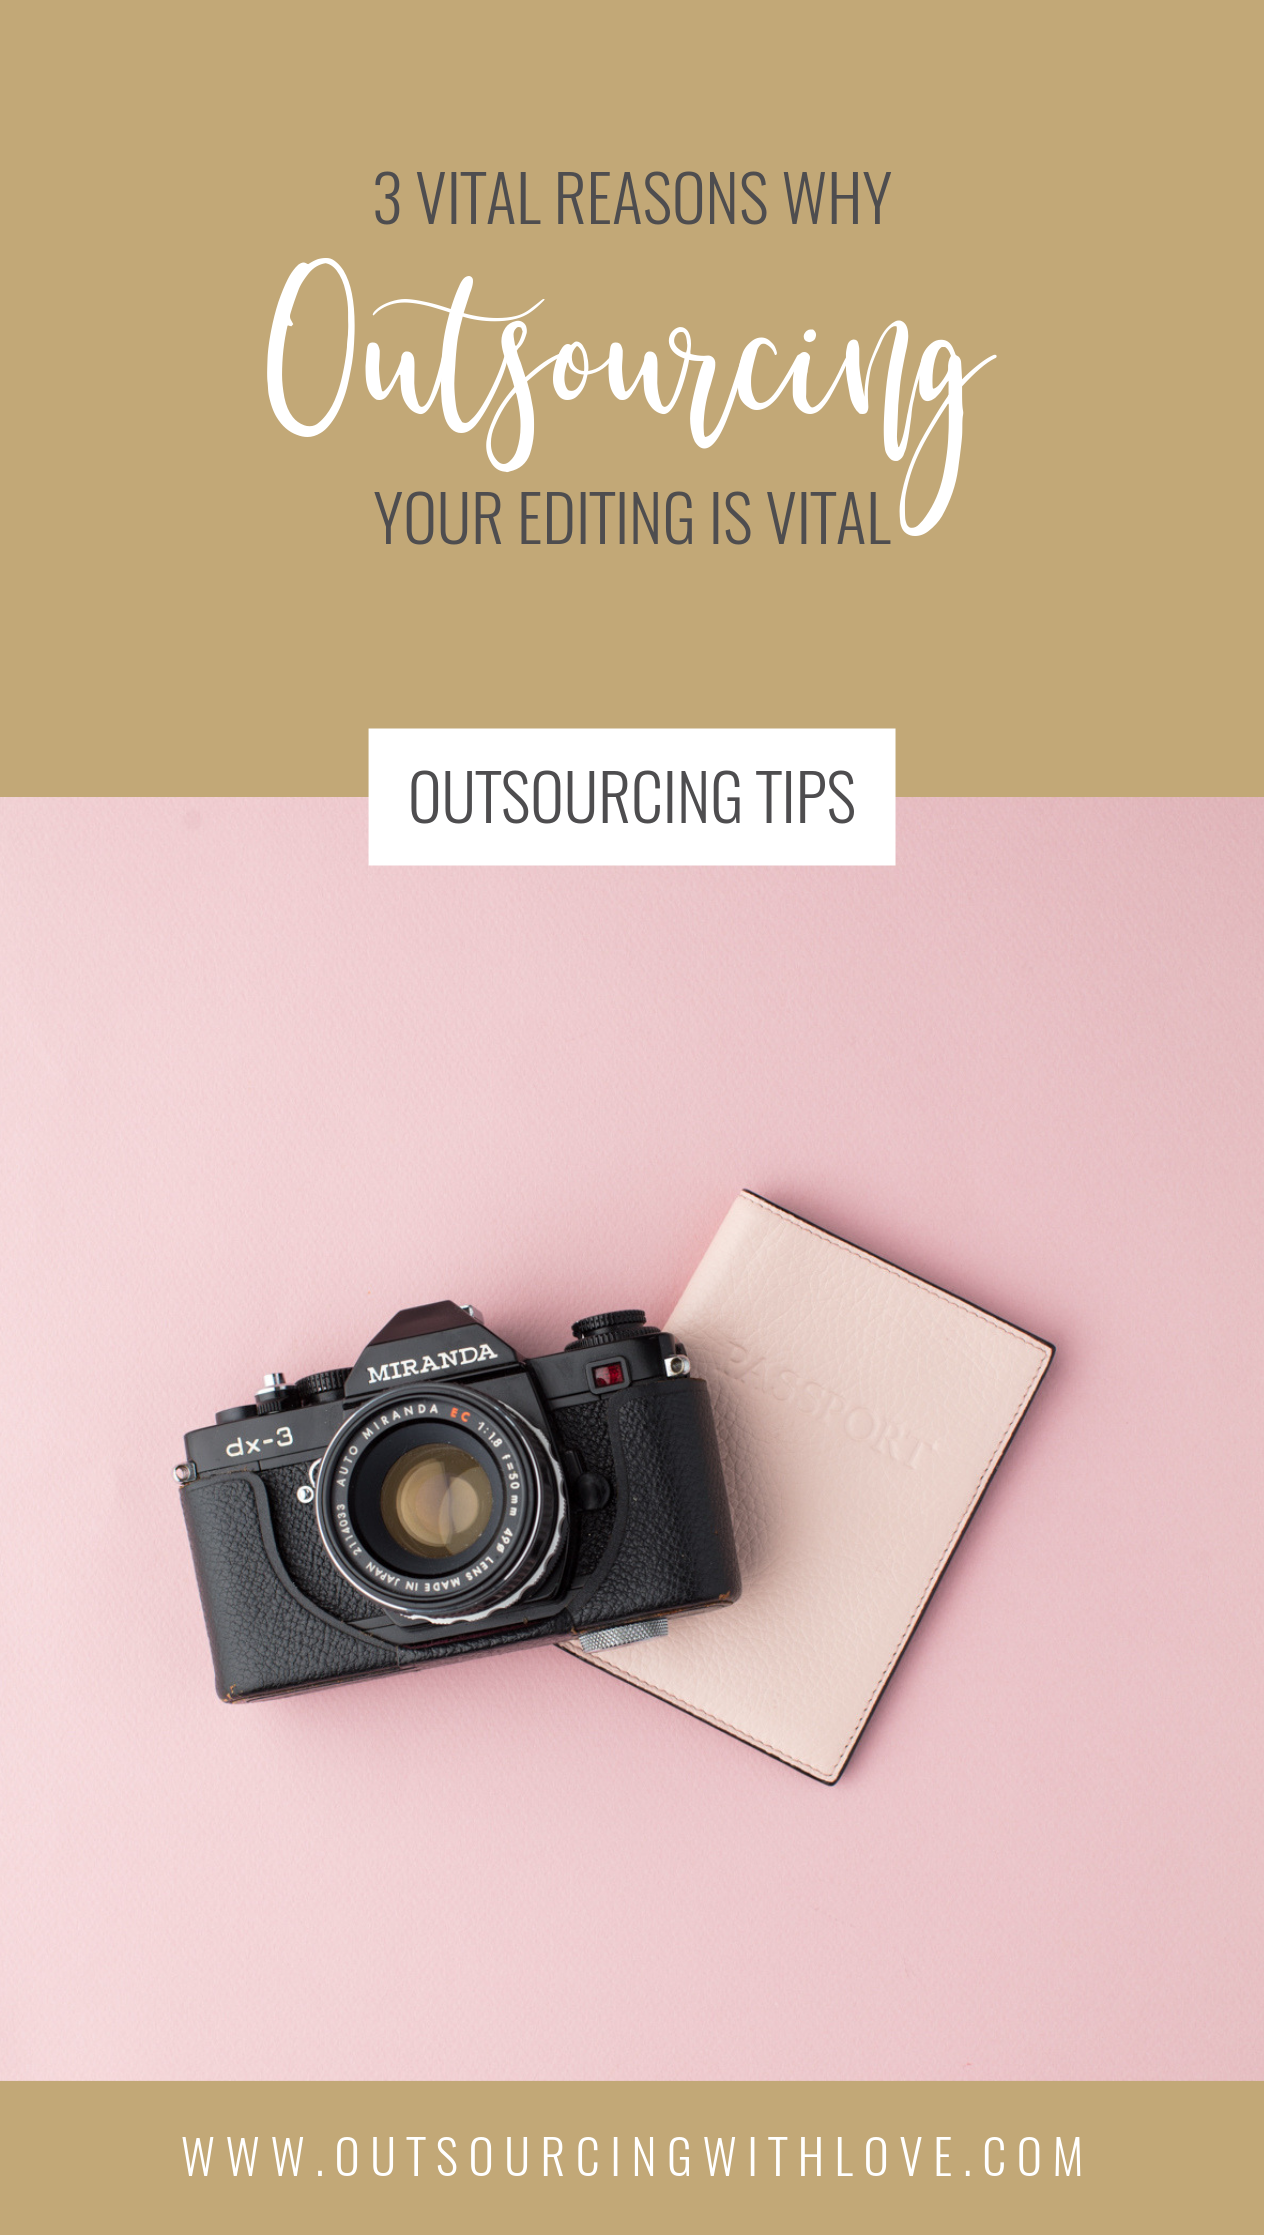 Three Vital Reasons Why Outsourcing Your Editing is Vital | Janelle Joy Private Photo Editors for Outsourcing With Love